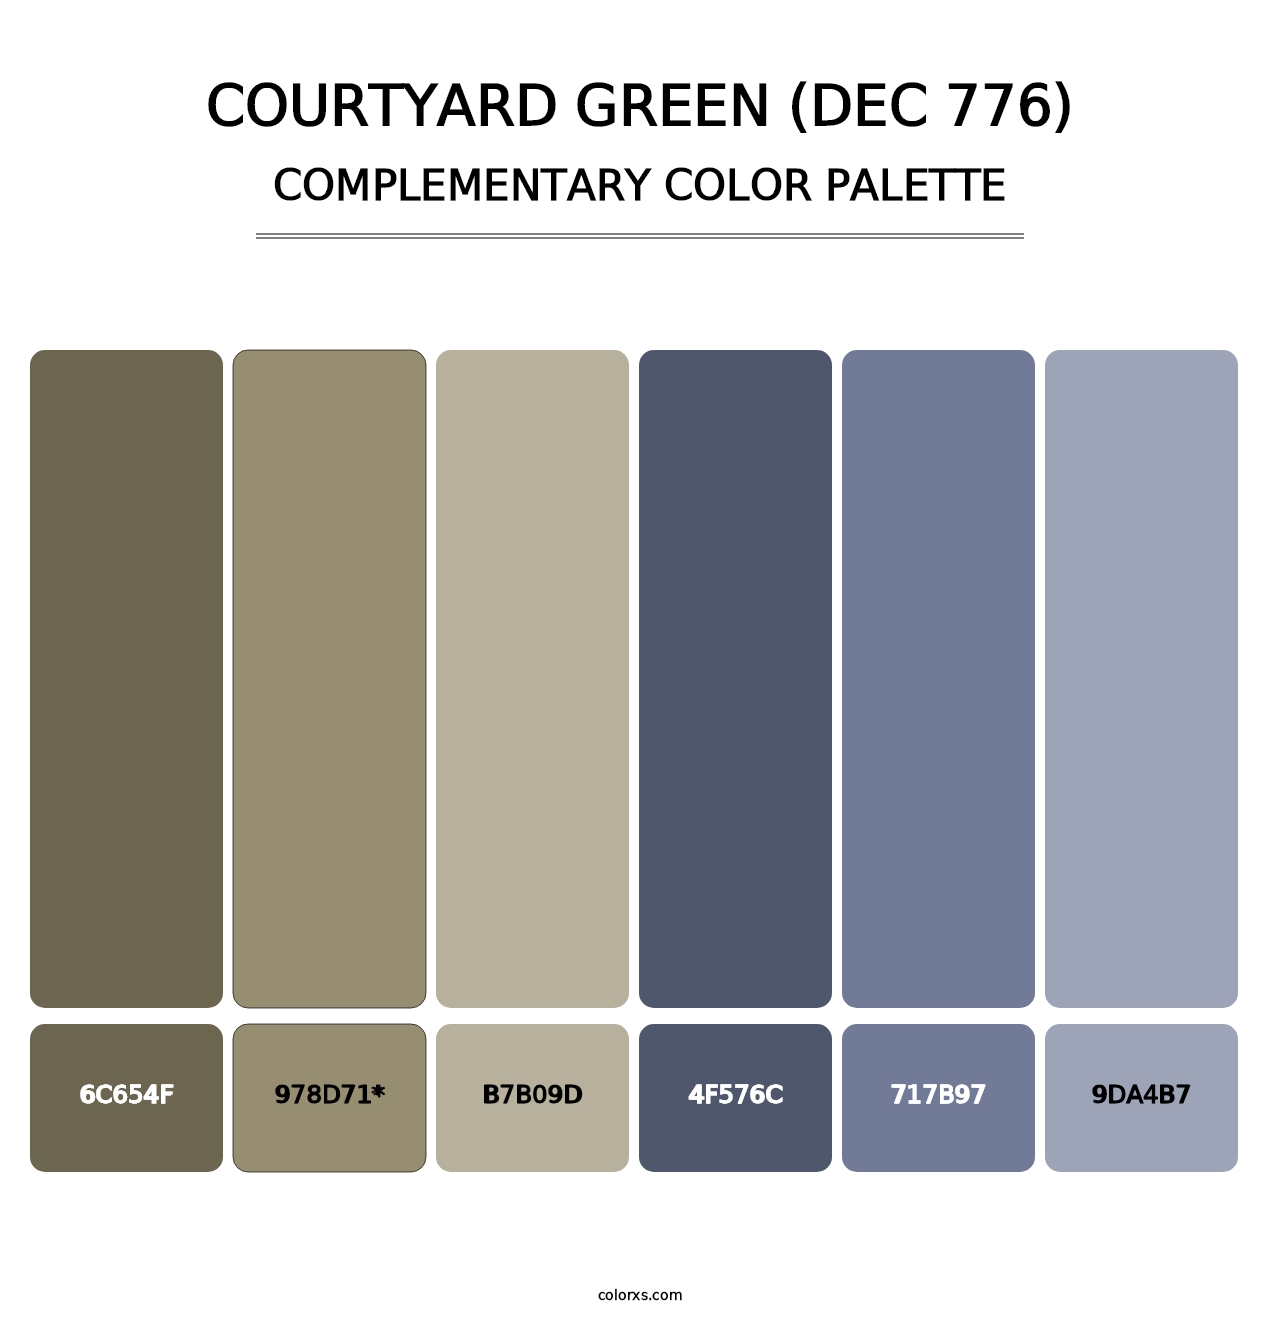 Courtyard Green (DEC 776) - Complementary Color Palette